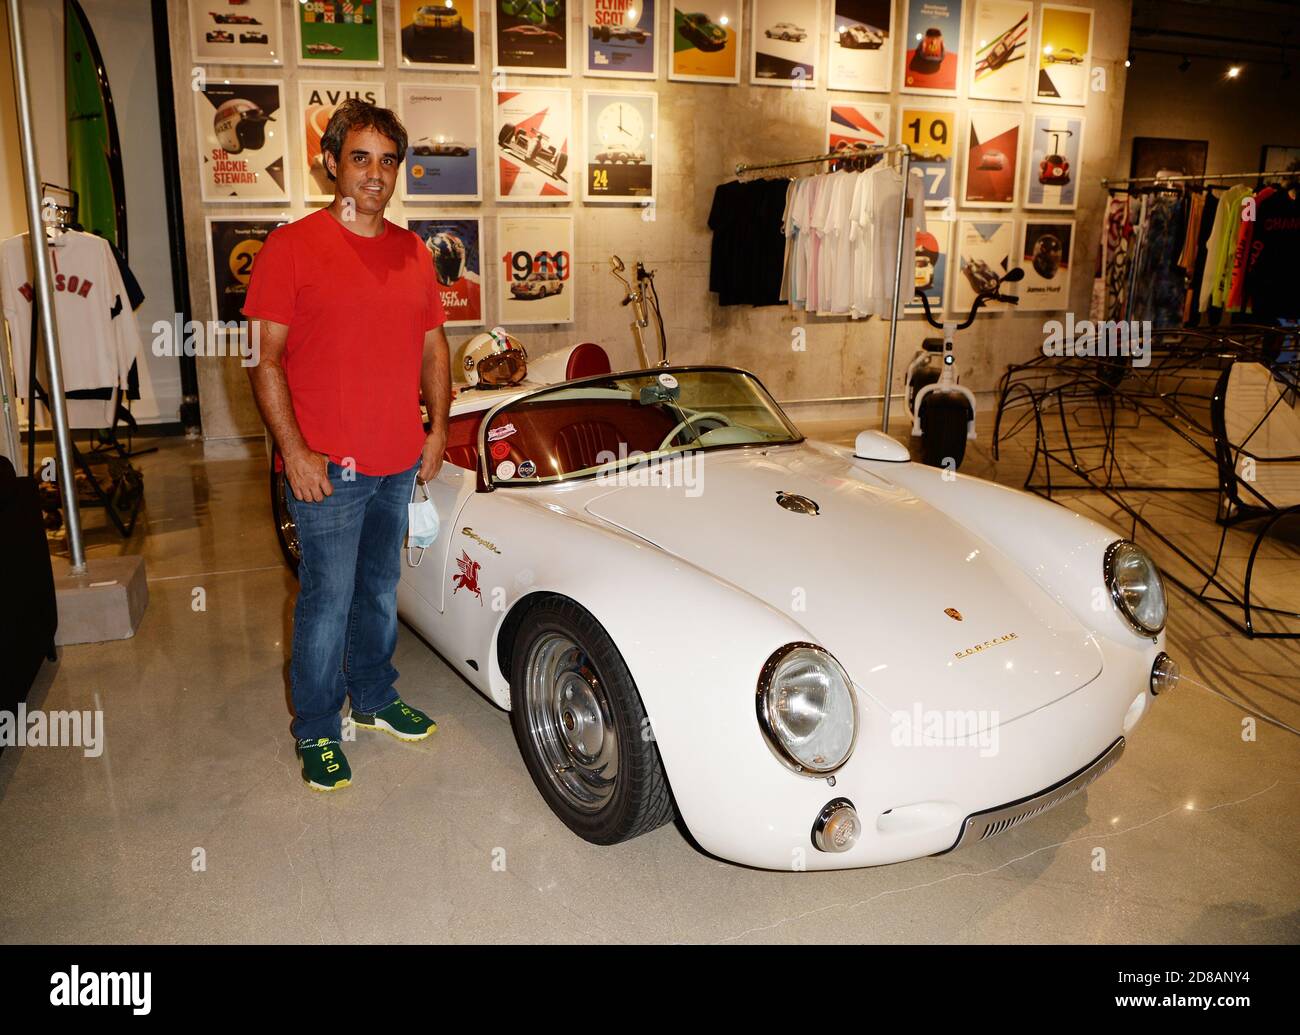 Miami, FL, USA. 27th Oct, 2020. Juan Pablo Montoya poses during the AIS Racing Simulator event at the Arsenale on October 27, 2020 in Miami Florida. Credit: Mpi04/Media Punch/Alamy Live News Stock Photo